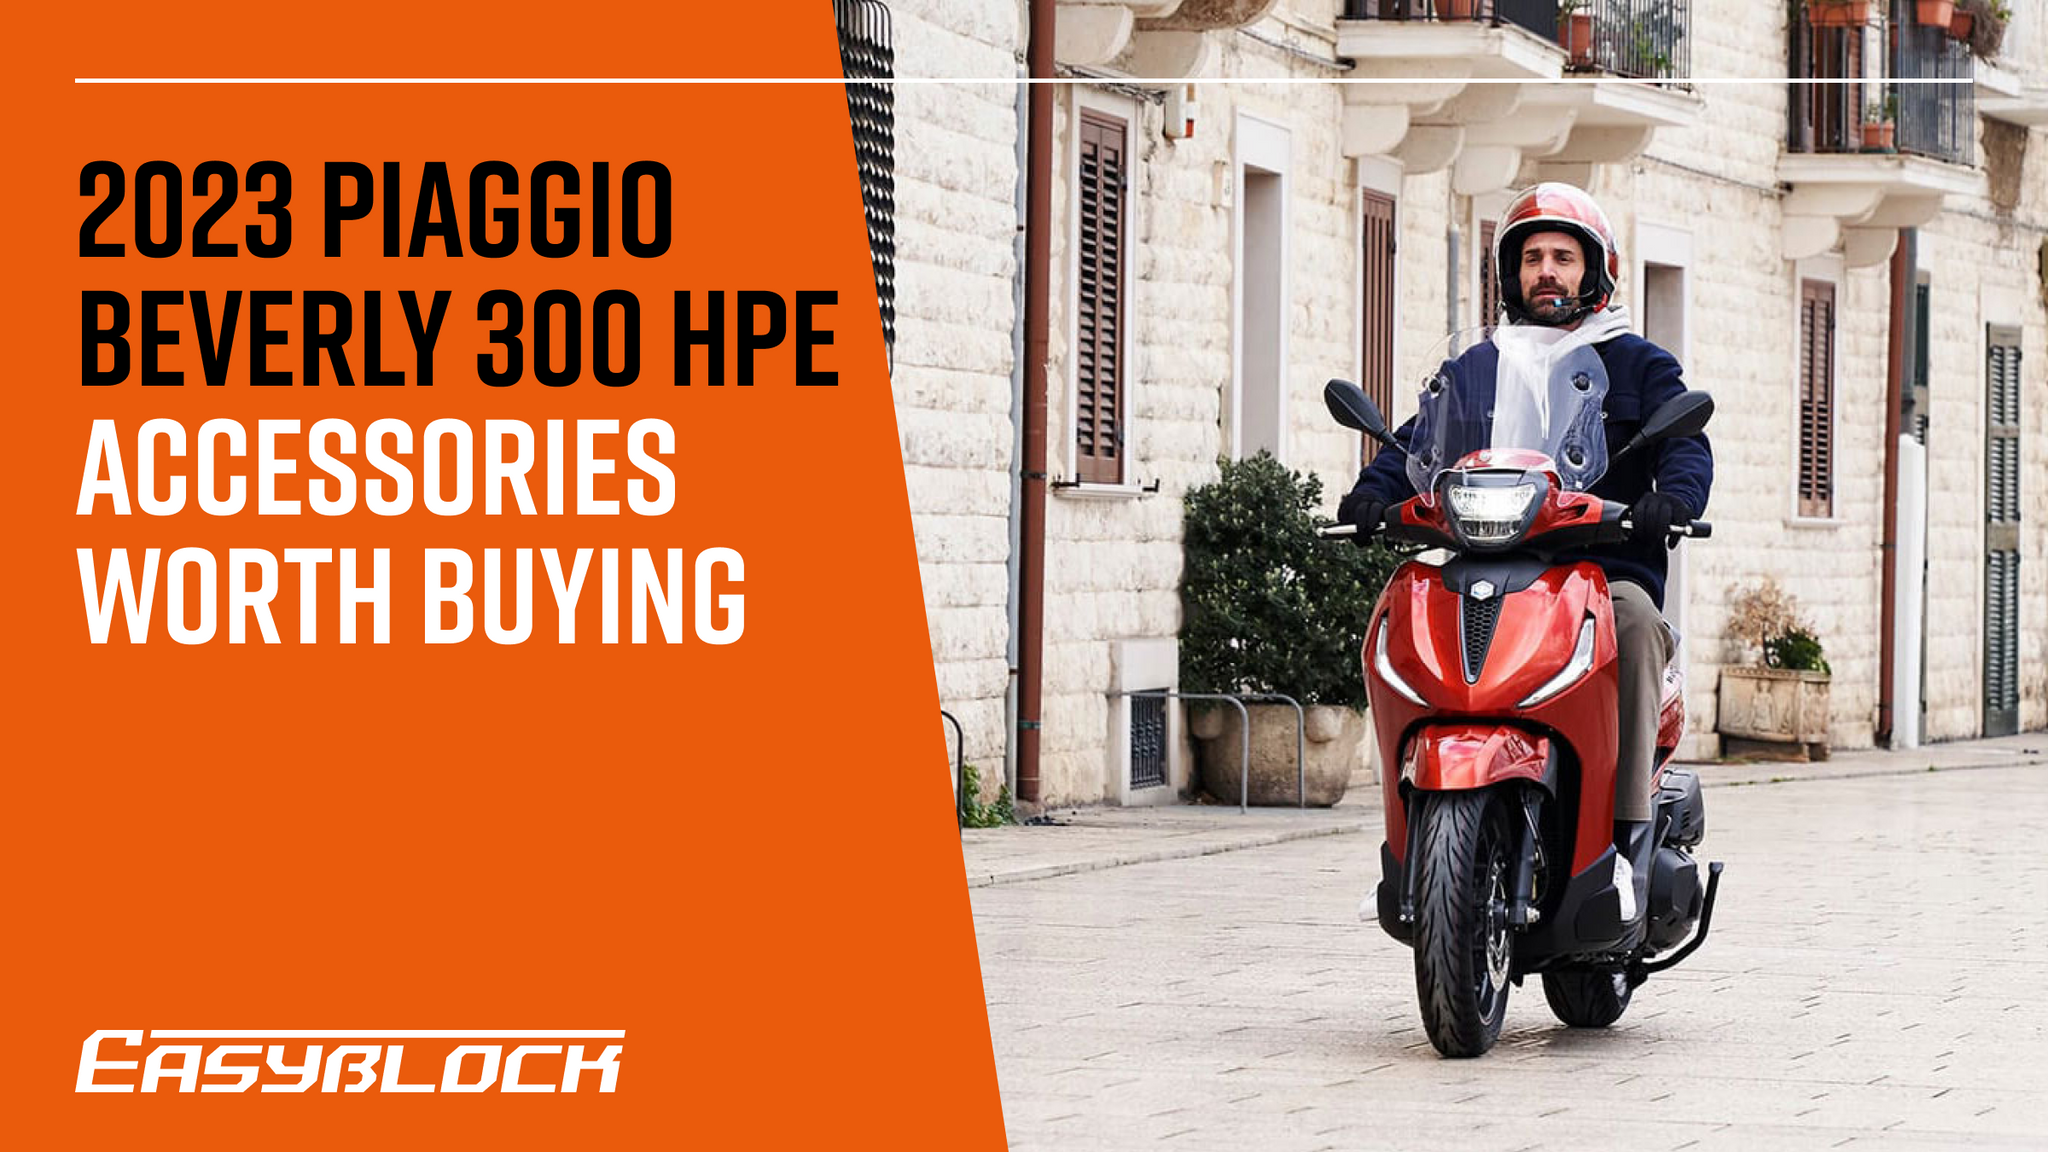 2023 Piaggio Beverly 300 HPE - Accessories Worth Buying